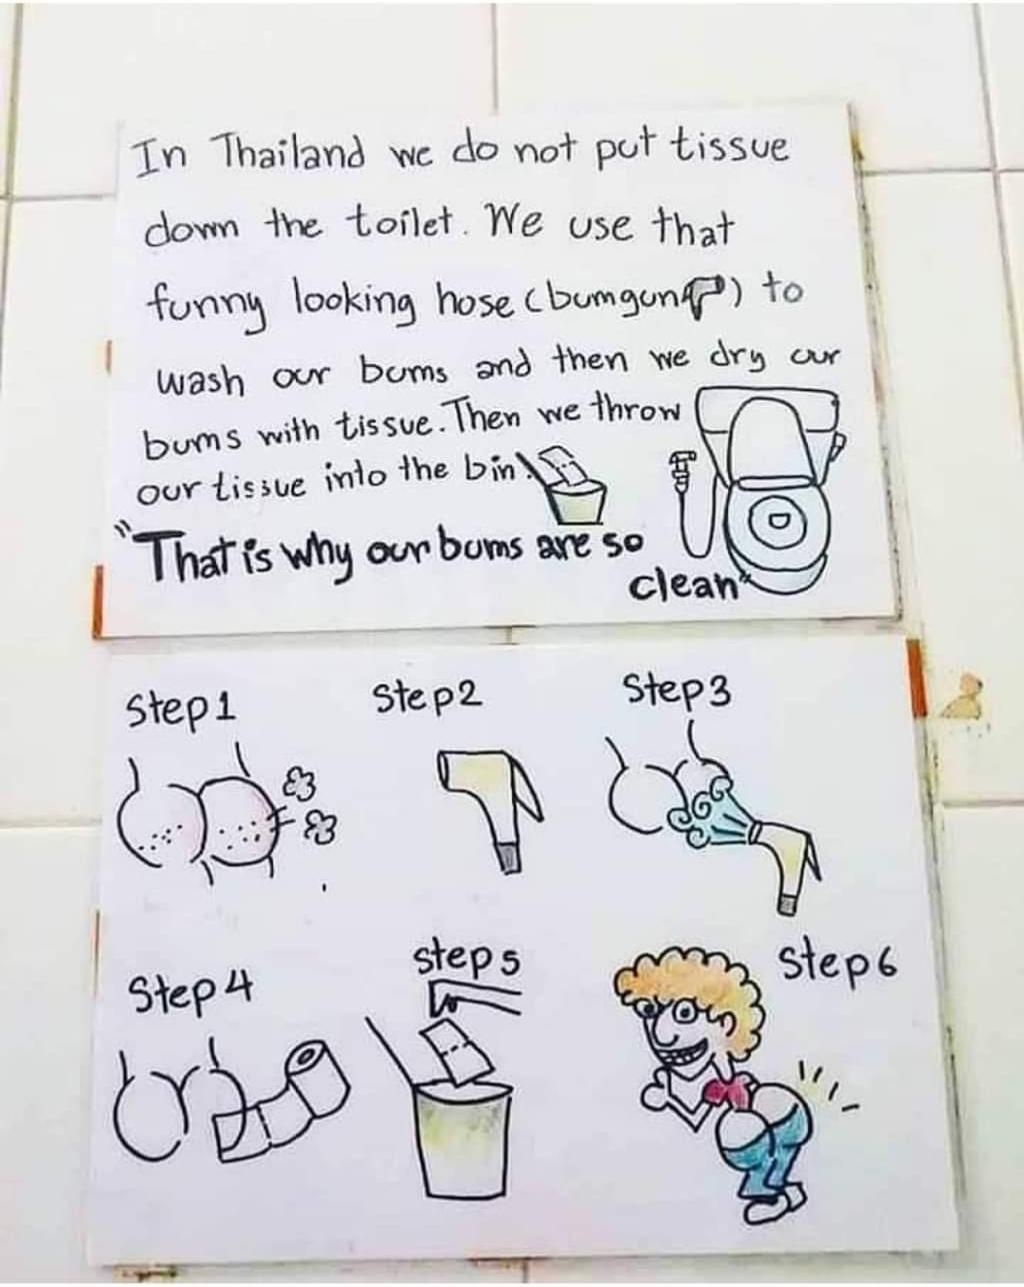 Came across this simple illustrated 6-step guide teaching foreigners how to poop in Thailand.